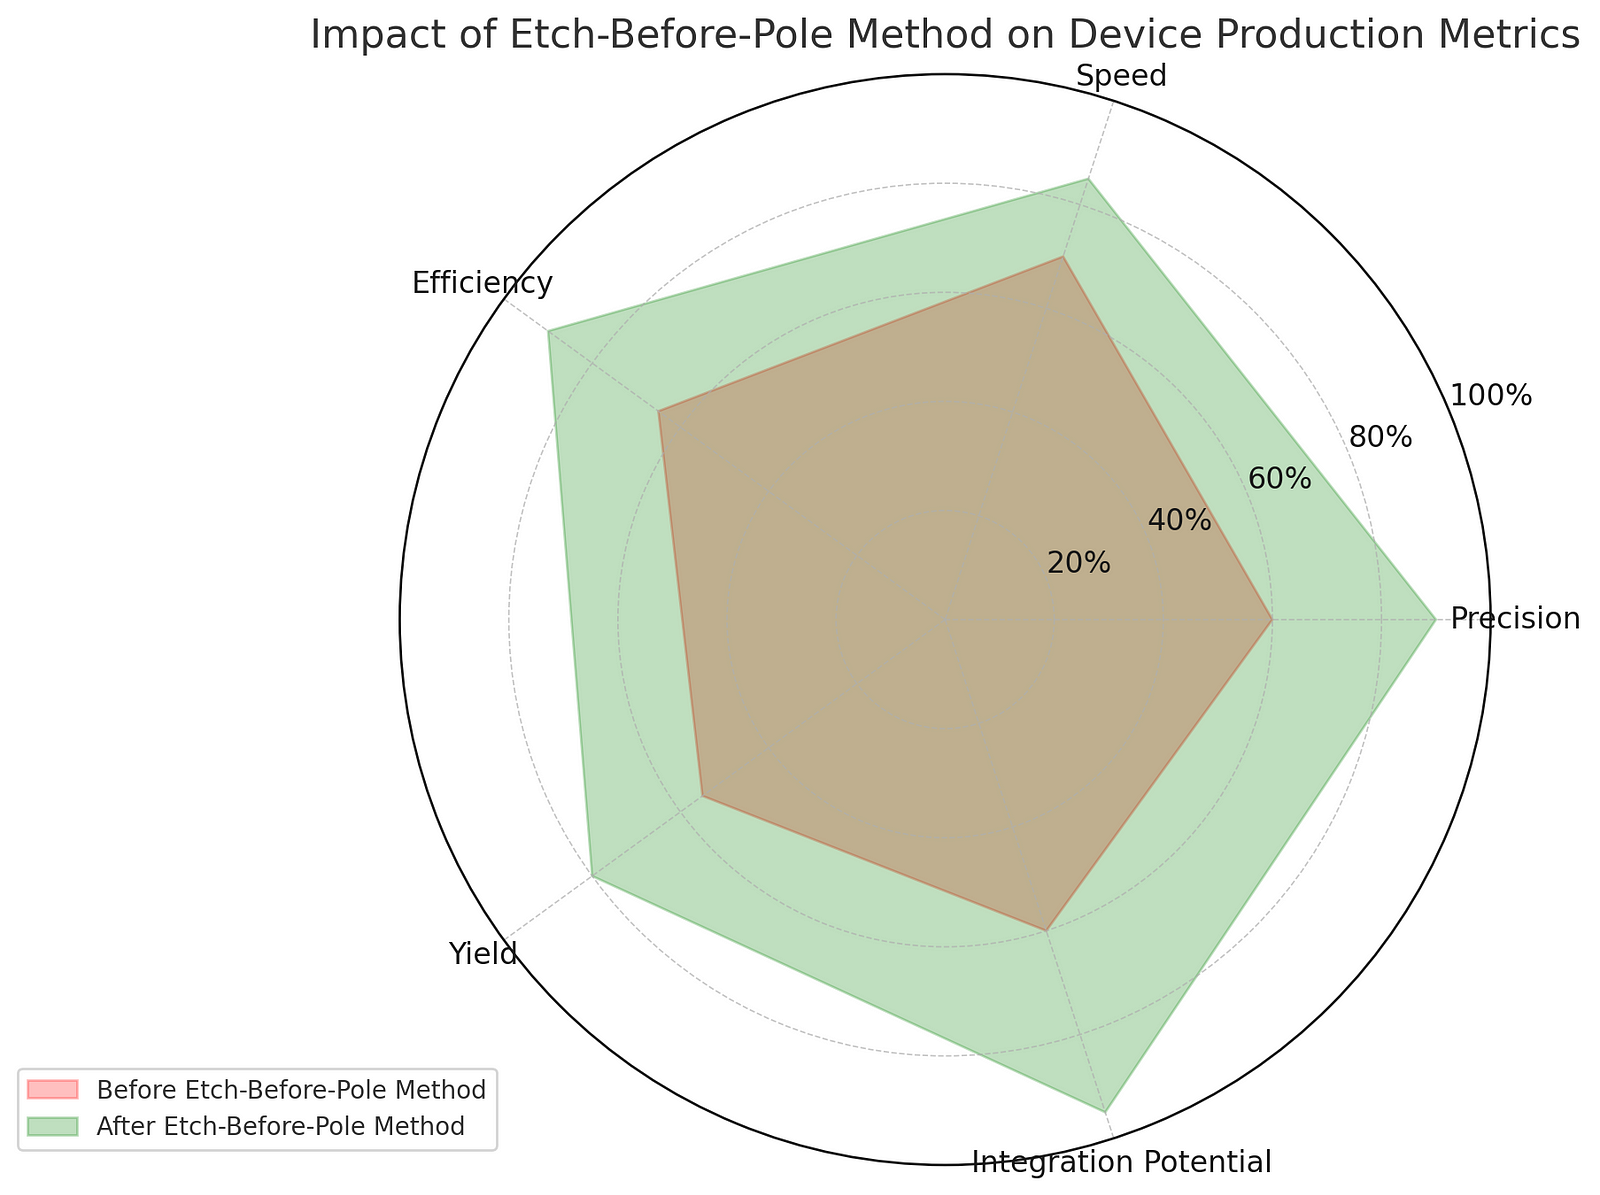 Radar chart comparing performance metrics of thin-film lithium niobate devices before and after the adoption of the etch-before-pole method. The metrics include precision, speed, efficiency, yield, and integration potential. Each metric shows significant improvement in the new method, depicted by the expansion from the red area (before) to the green area (after).